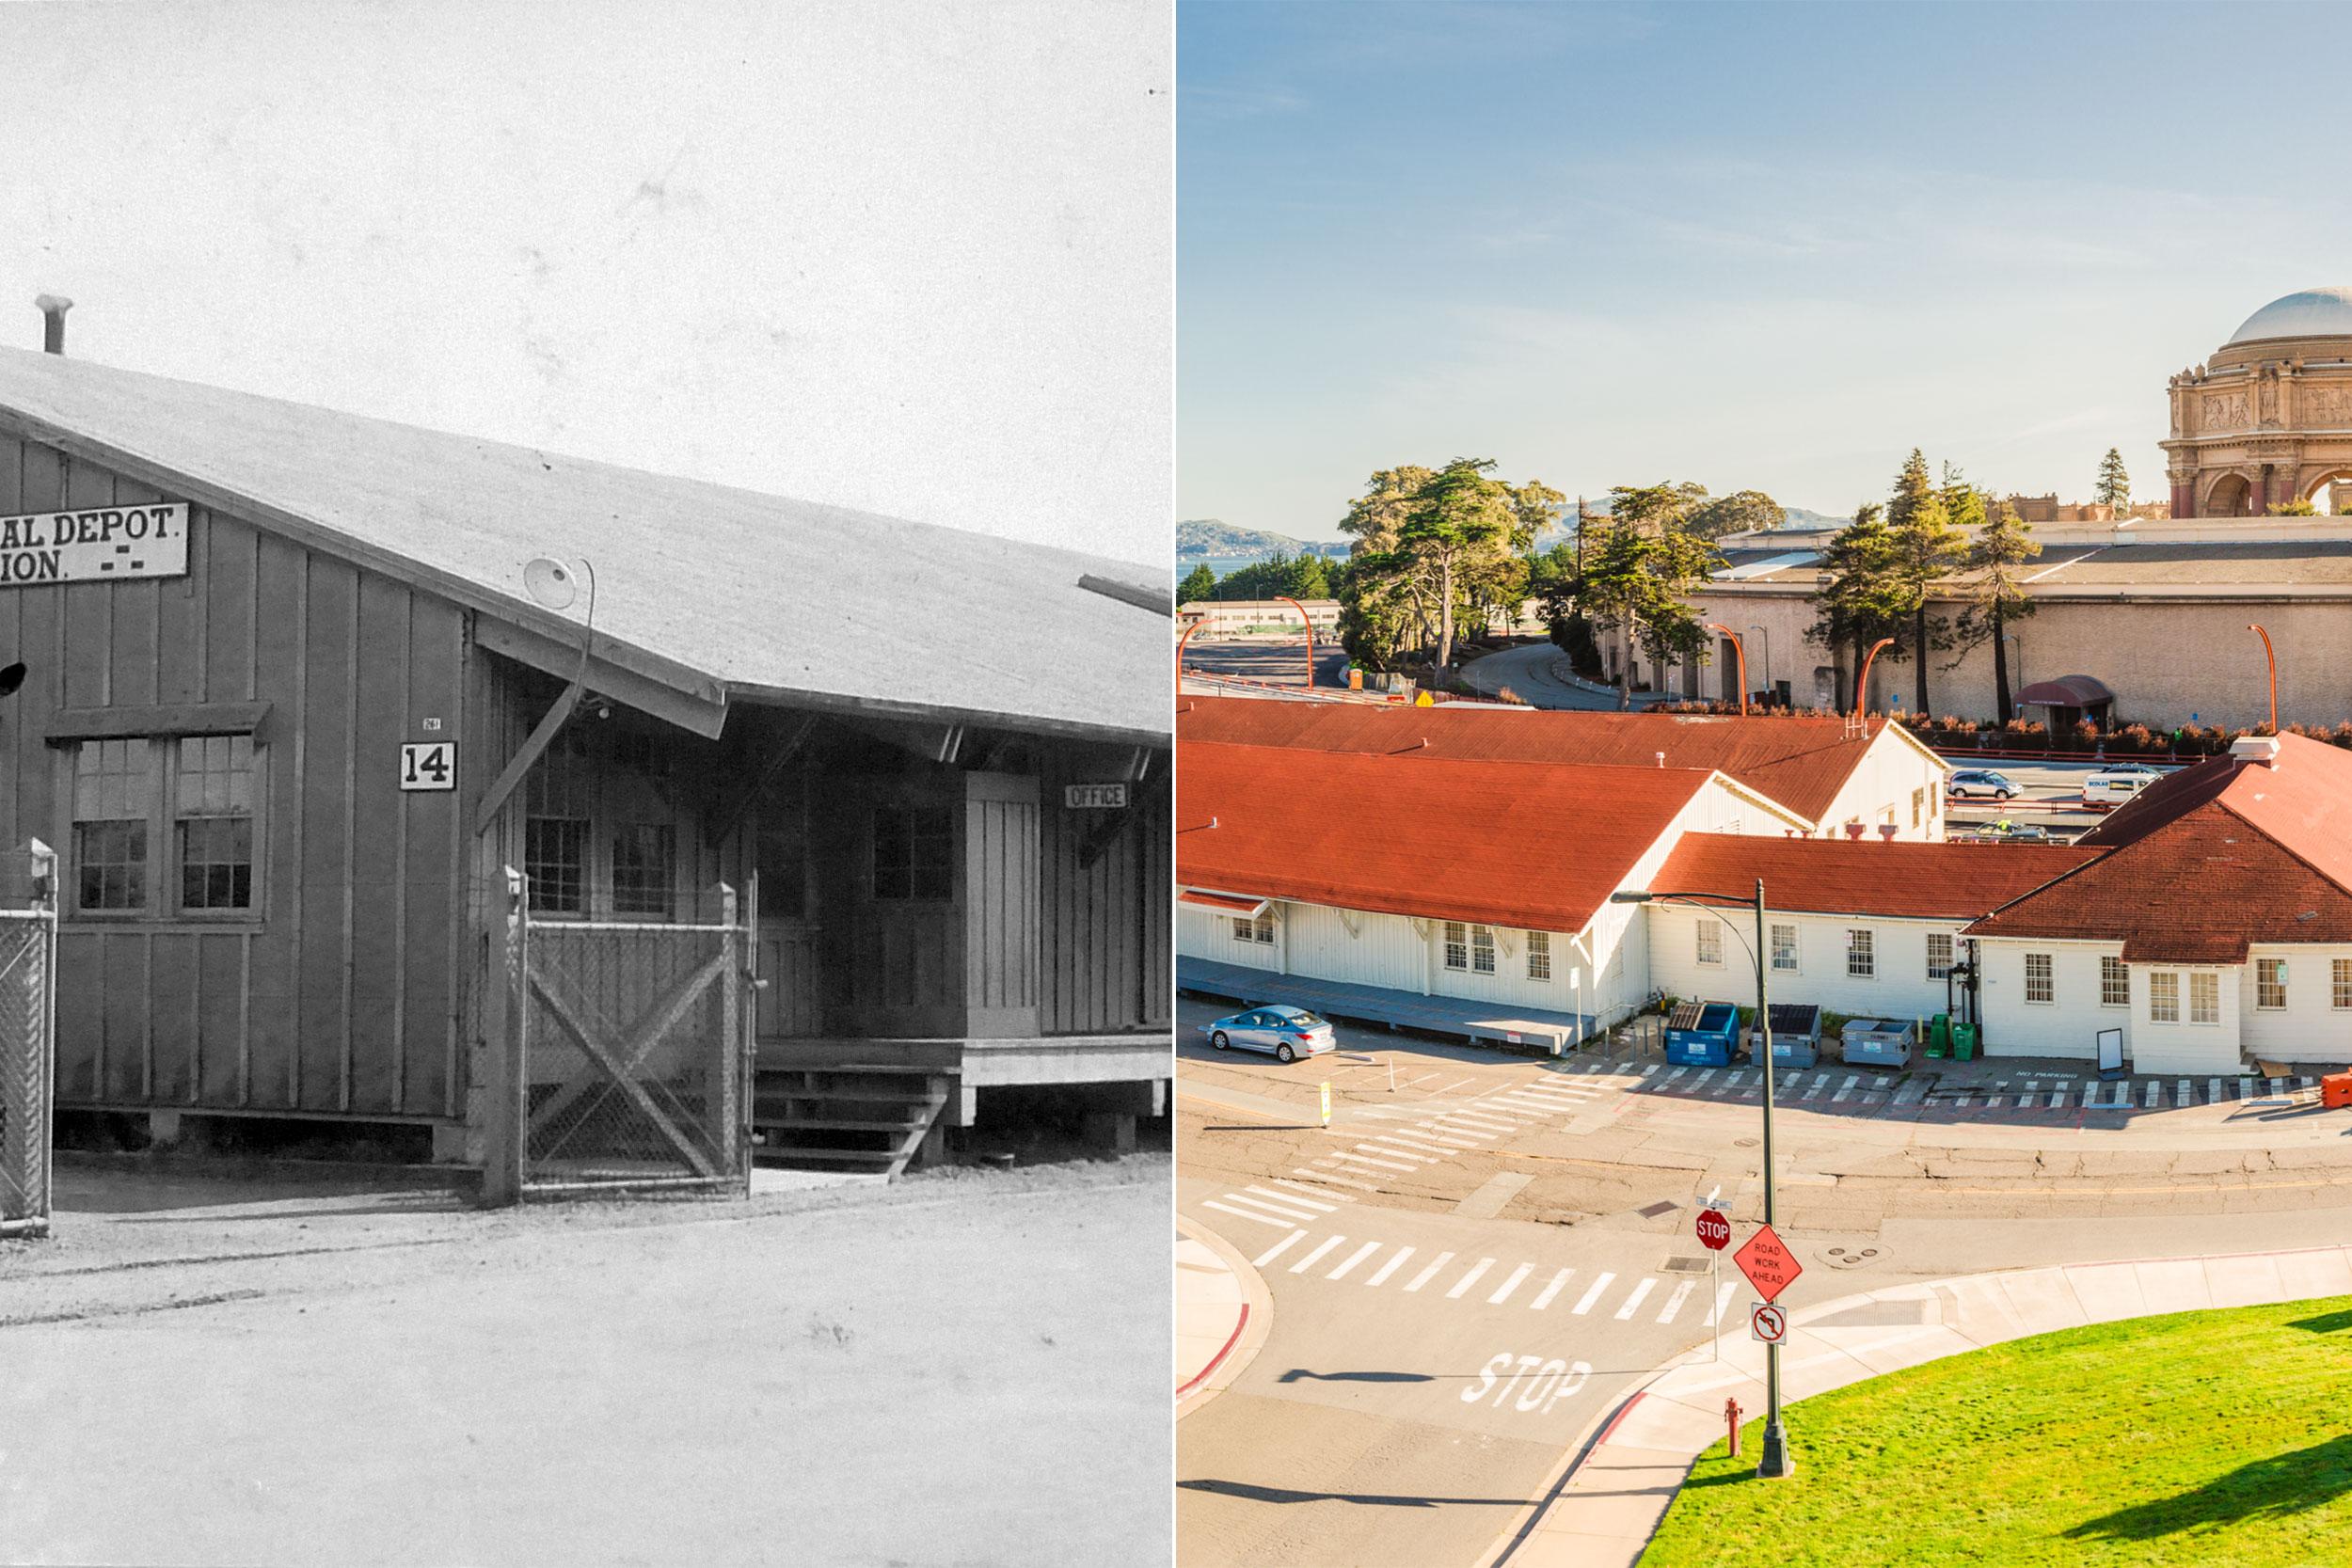 Gorgas Rail Warehouse then and now